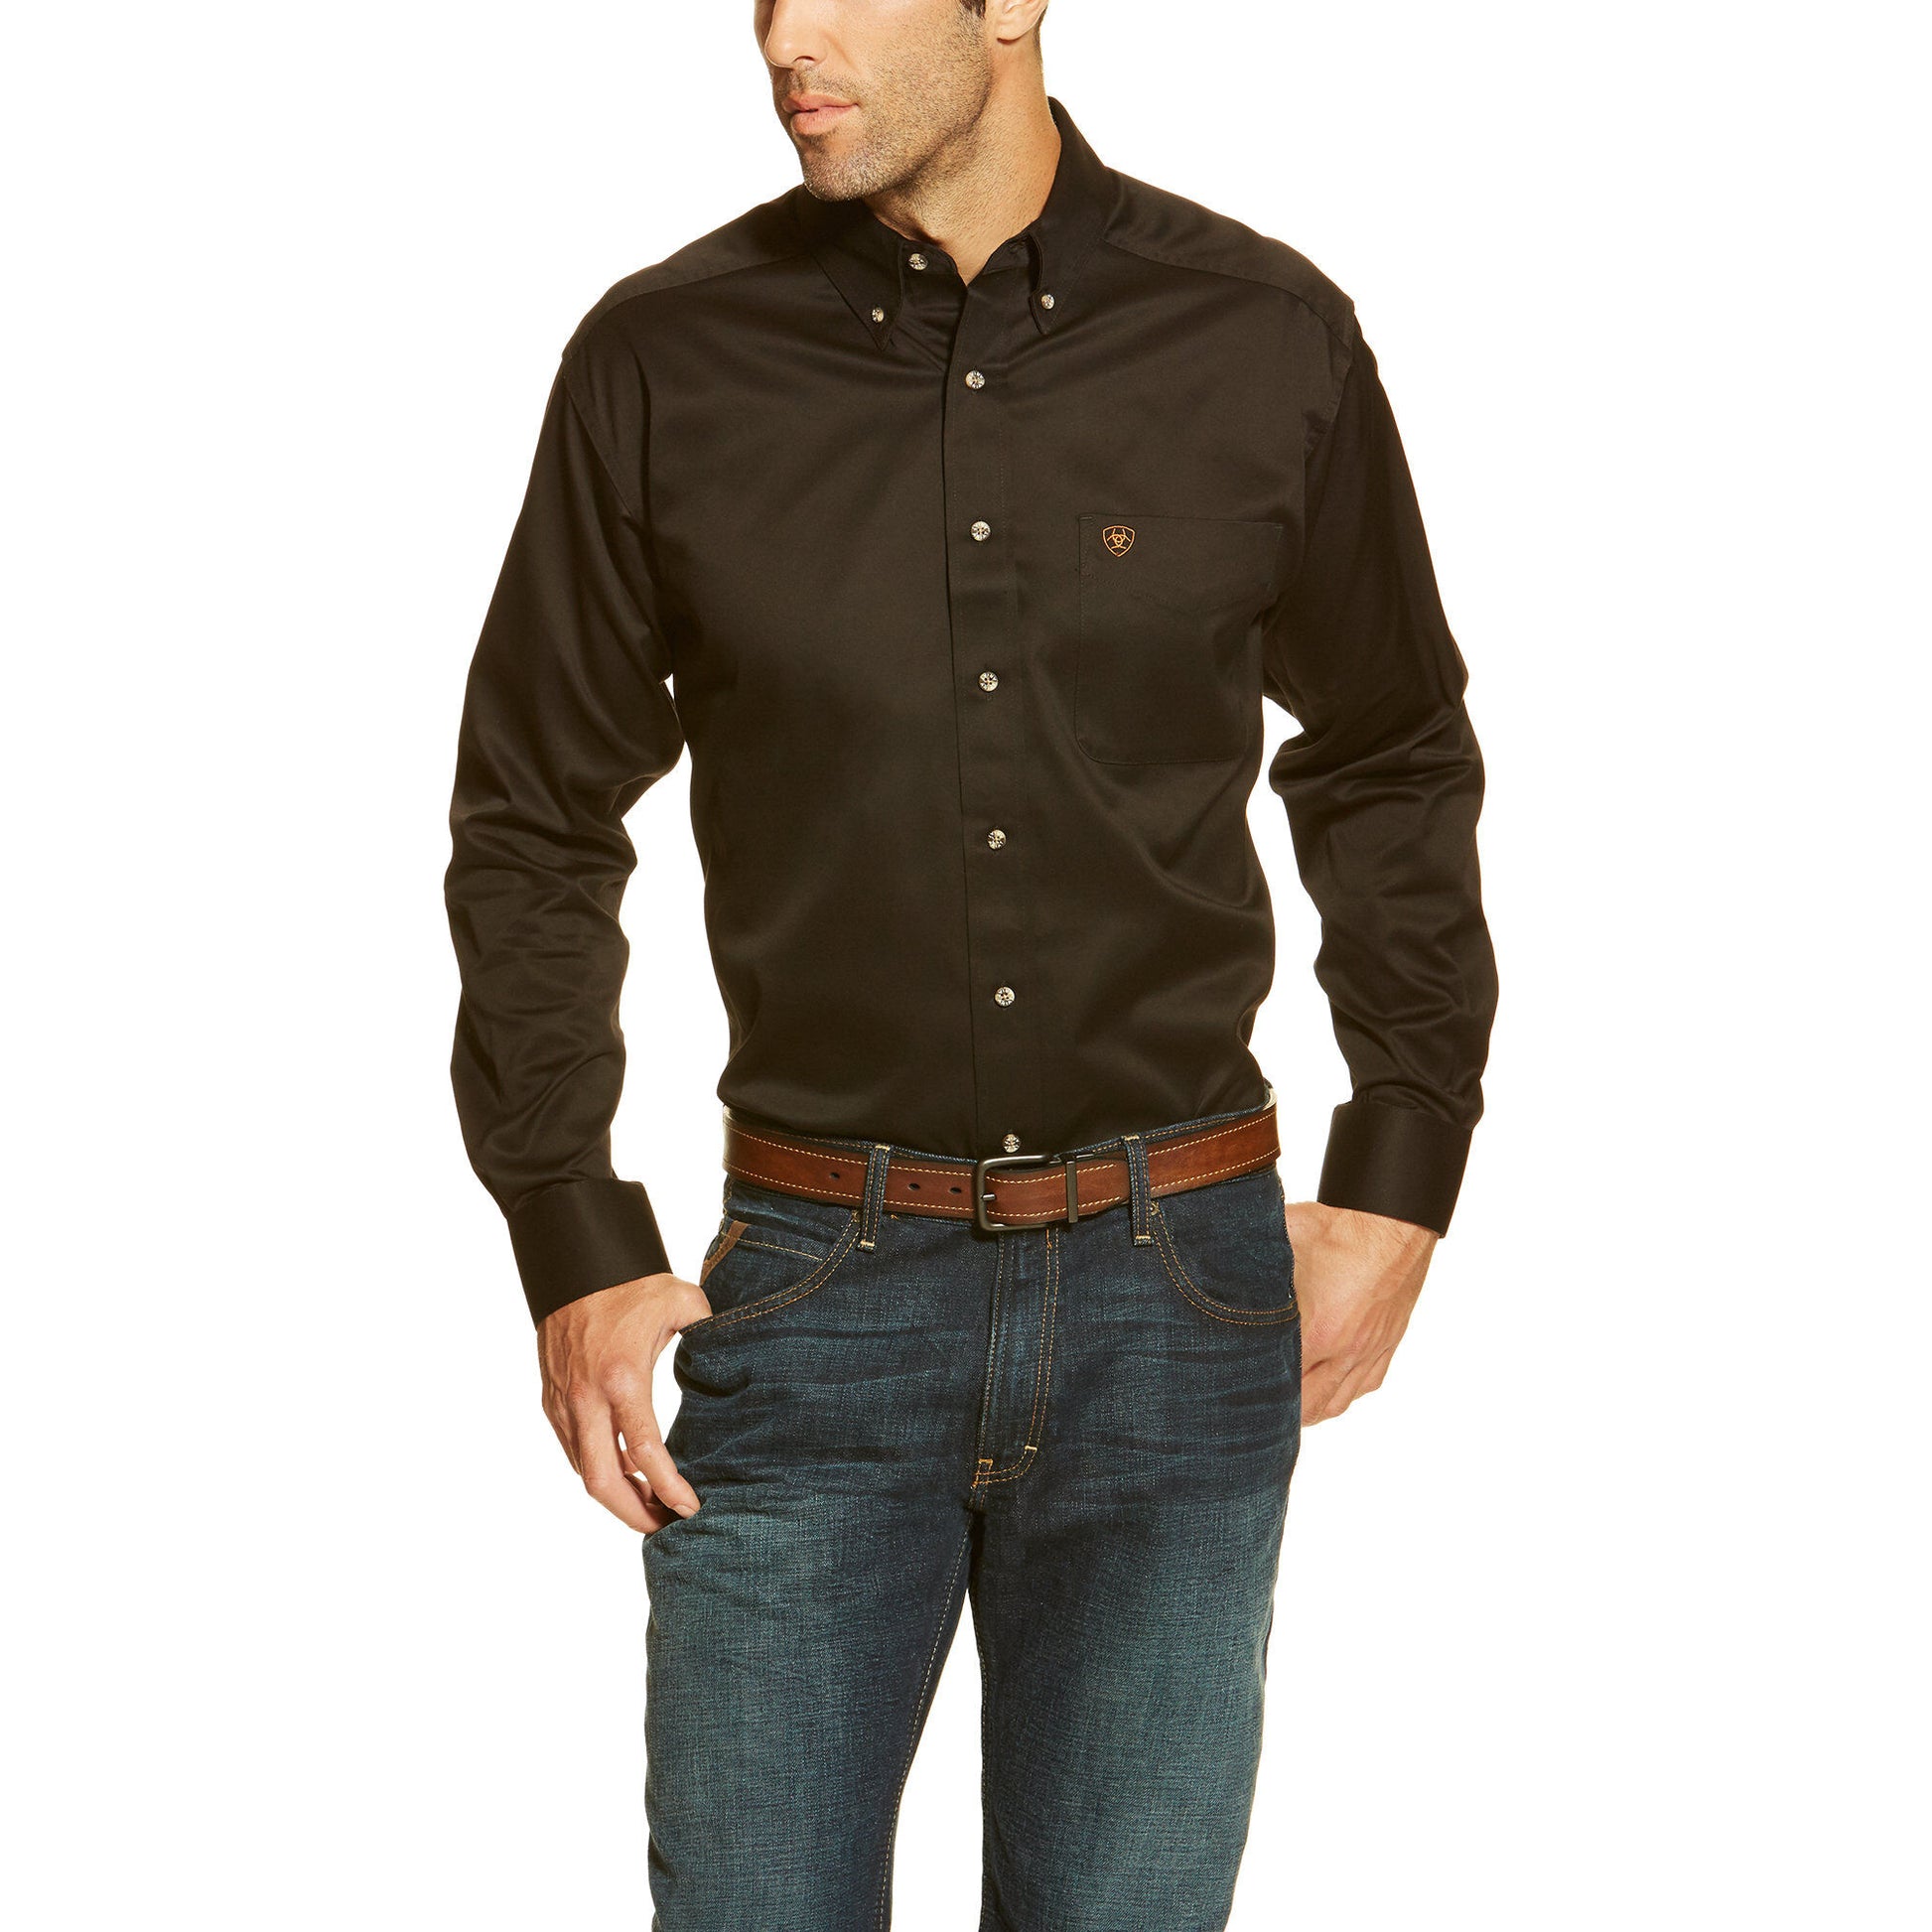 Ariat Men's Solid Twill Shirt - Black - French's Boots